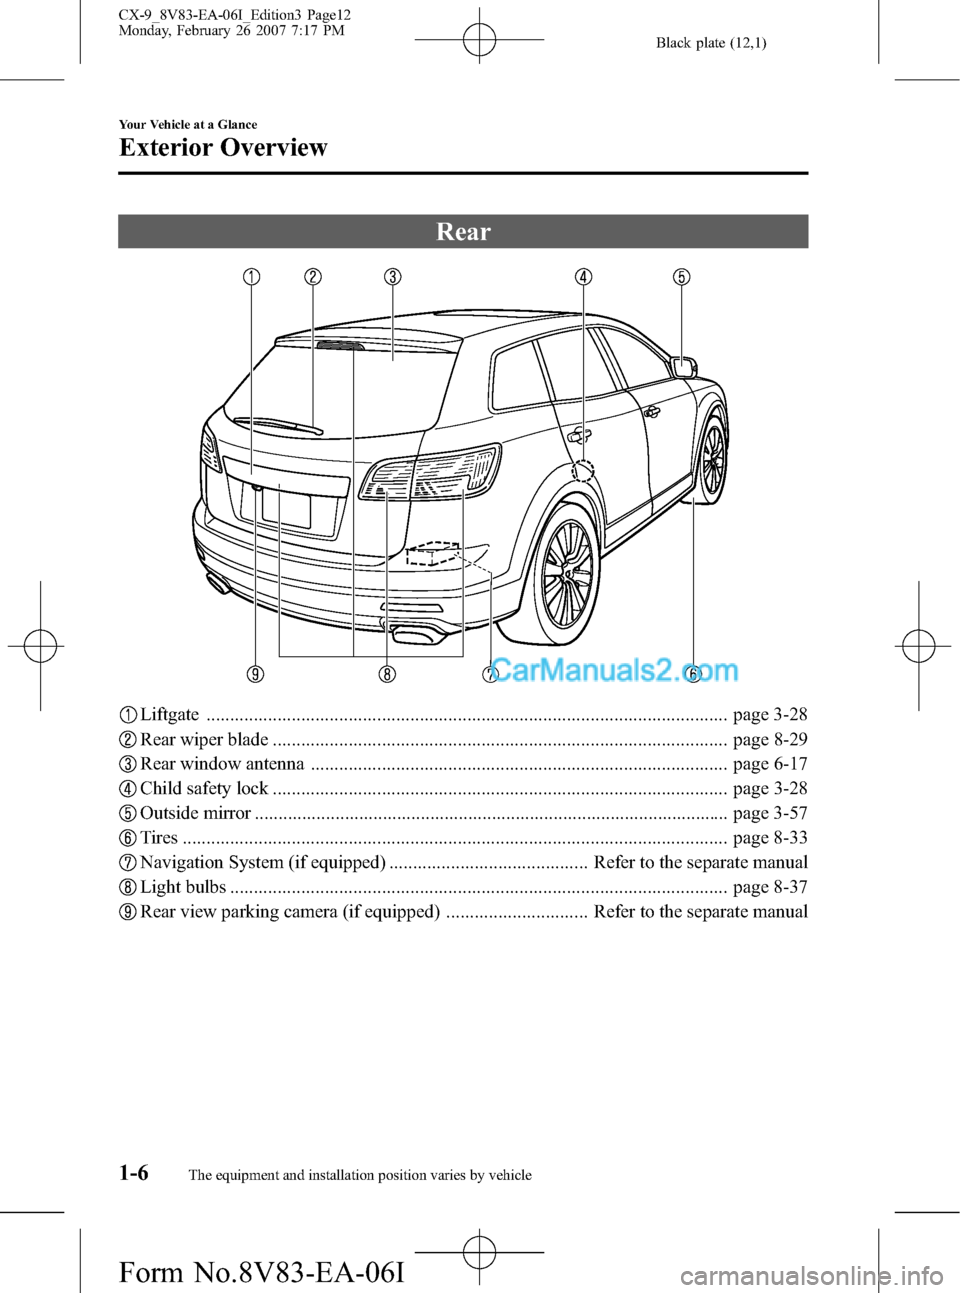 MAZDA MODEL CX-9 2007  Owners Manual (in English) Black plate (12,1)
Rear
Liftgate .............................................................................................................. page 3-28
Rear wiper blade .............................